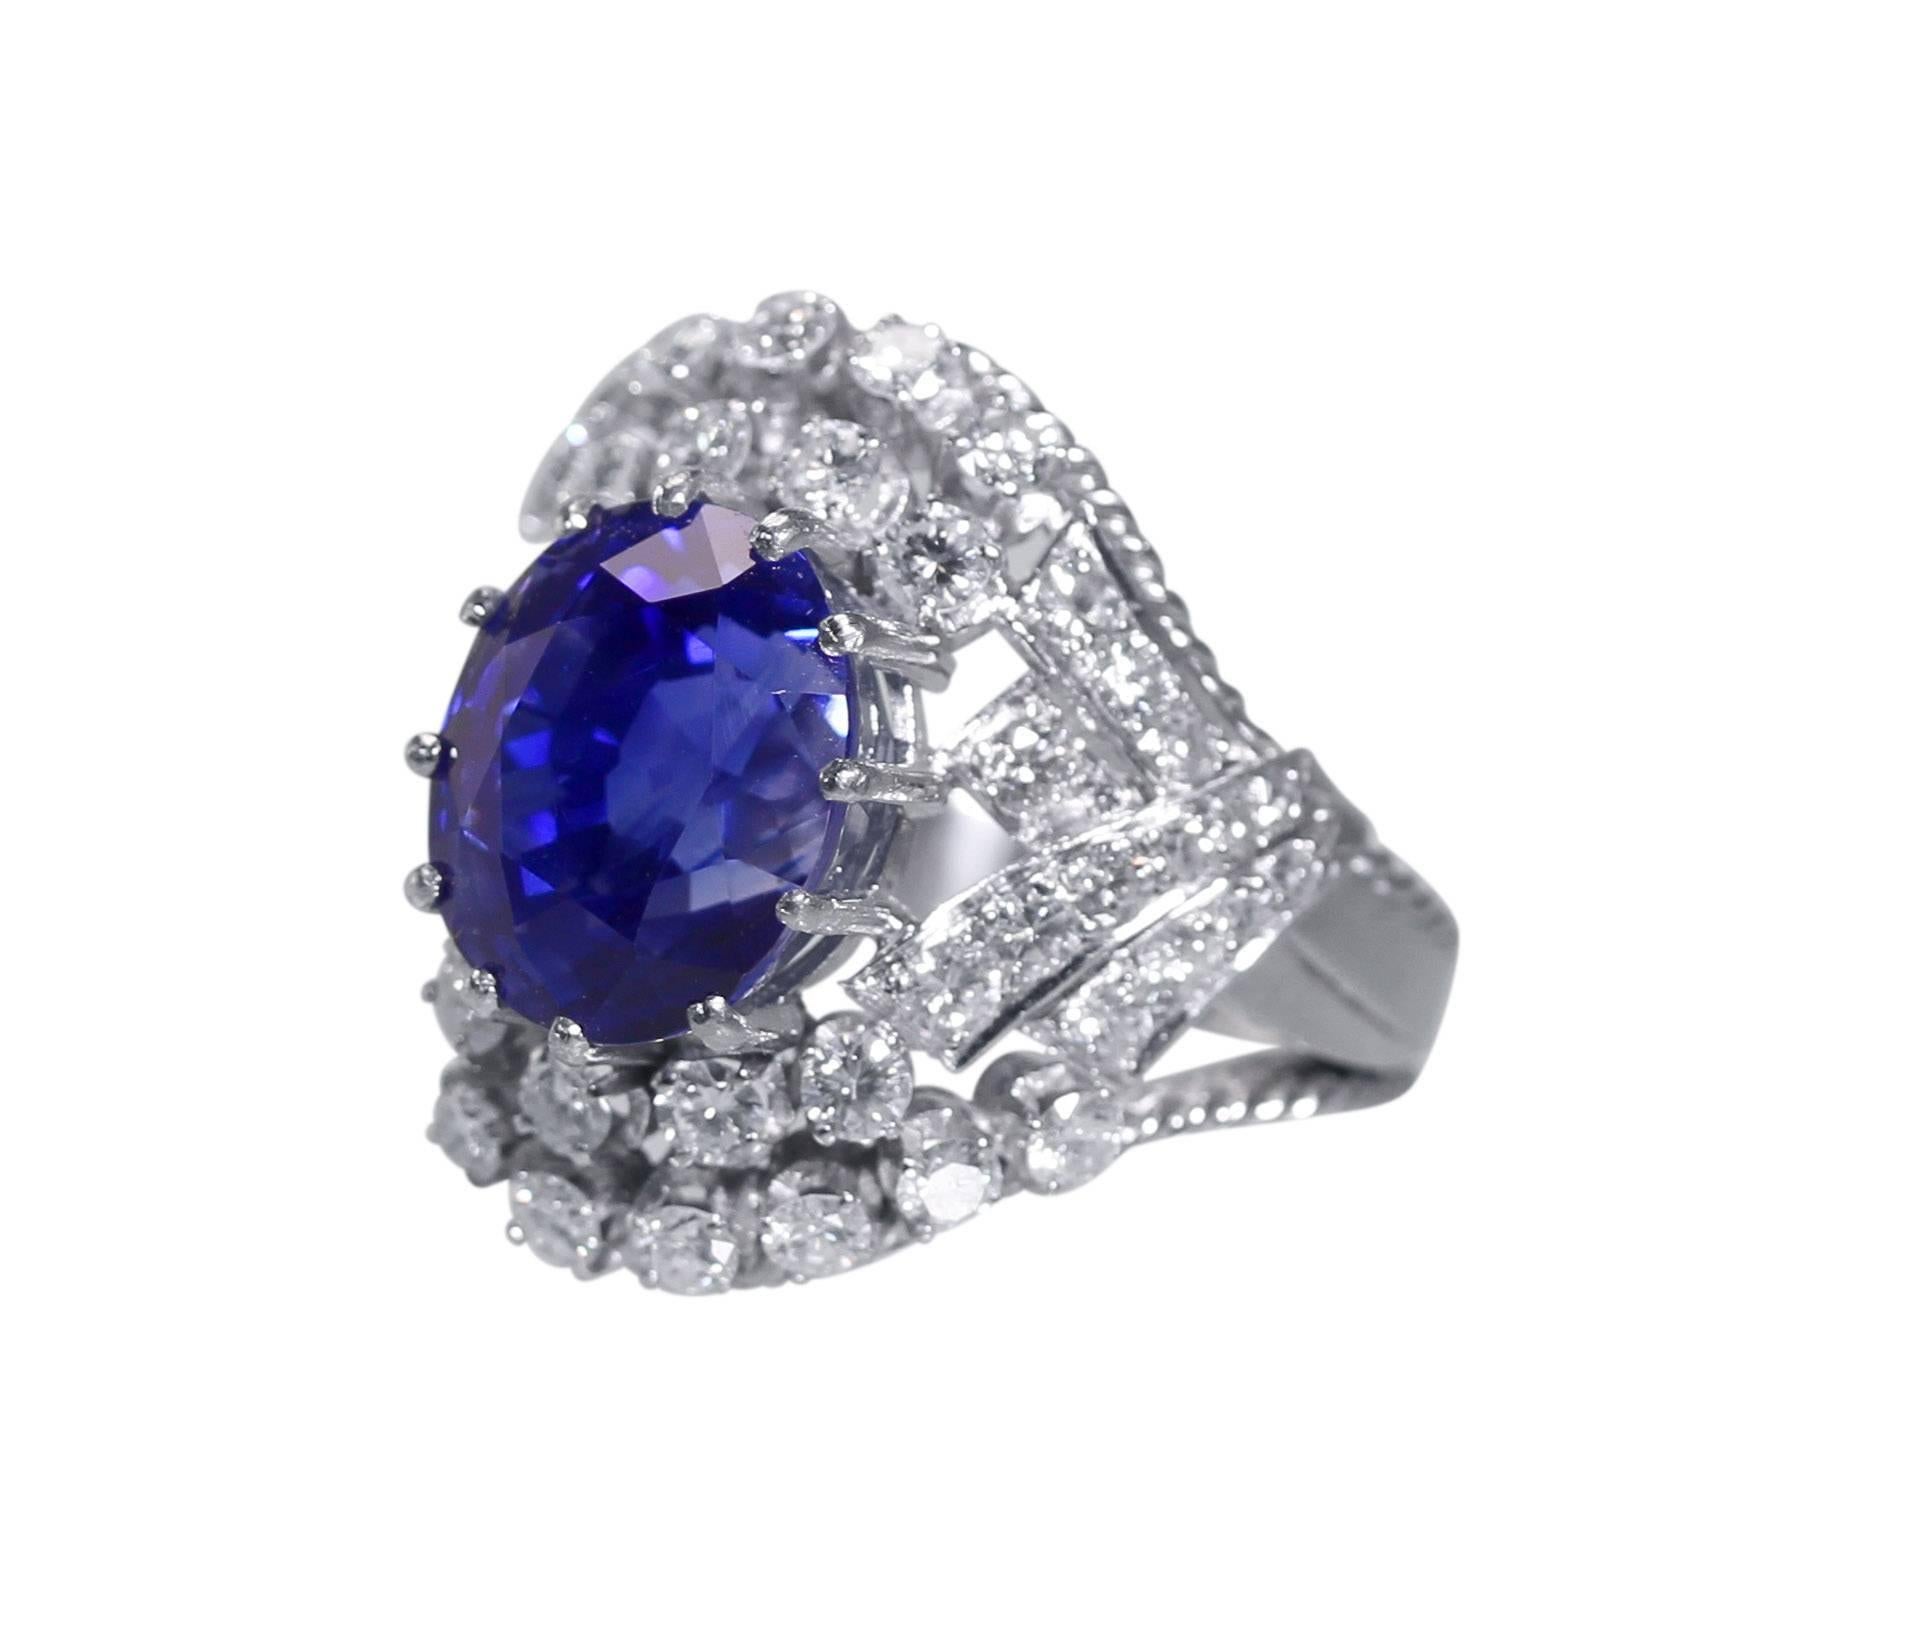 Platinum, Sapphire and Diamond Ring, circa 1950
• Oval sapphire weighing 12.00 carats
• Accompanied by recent AGL report stating that the sapphire is natural unheated from Sri Lanka (Ceylon)
• 48 round diamonds approximately 2.00 carats
• Size 7